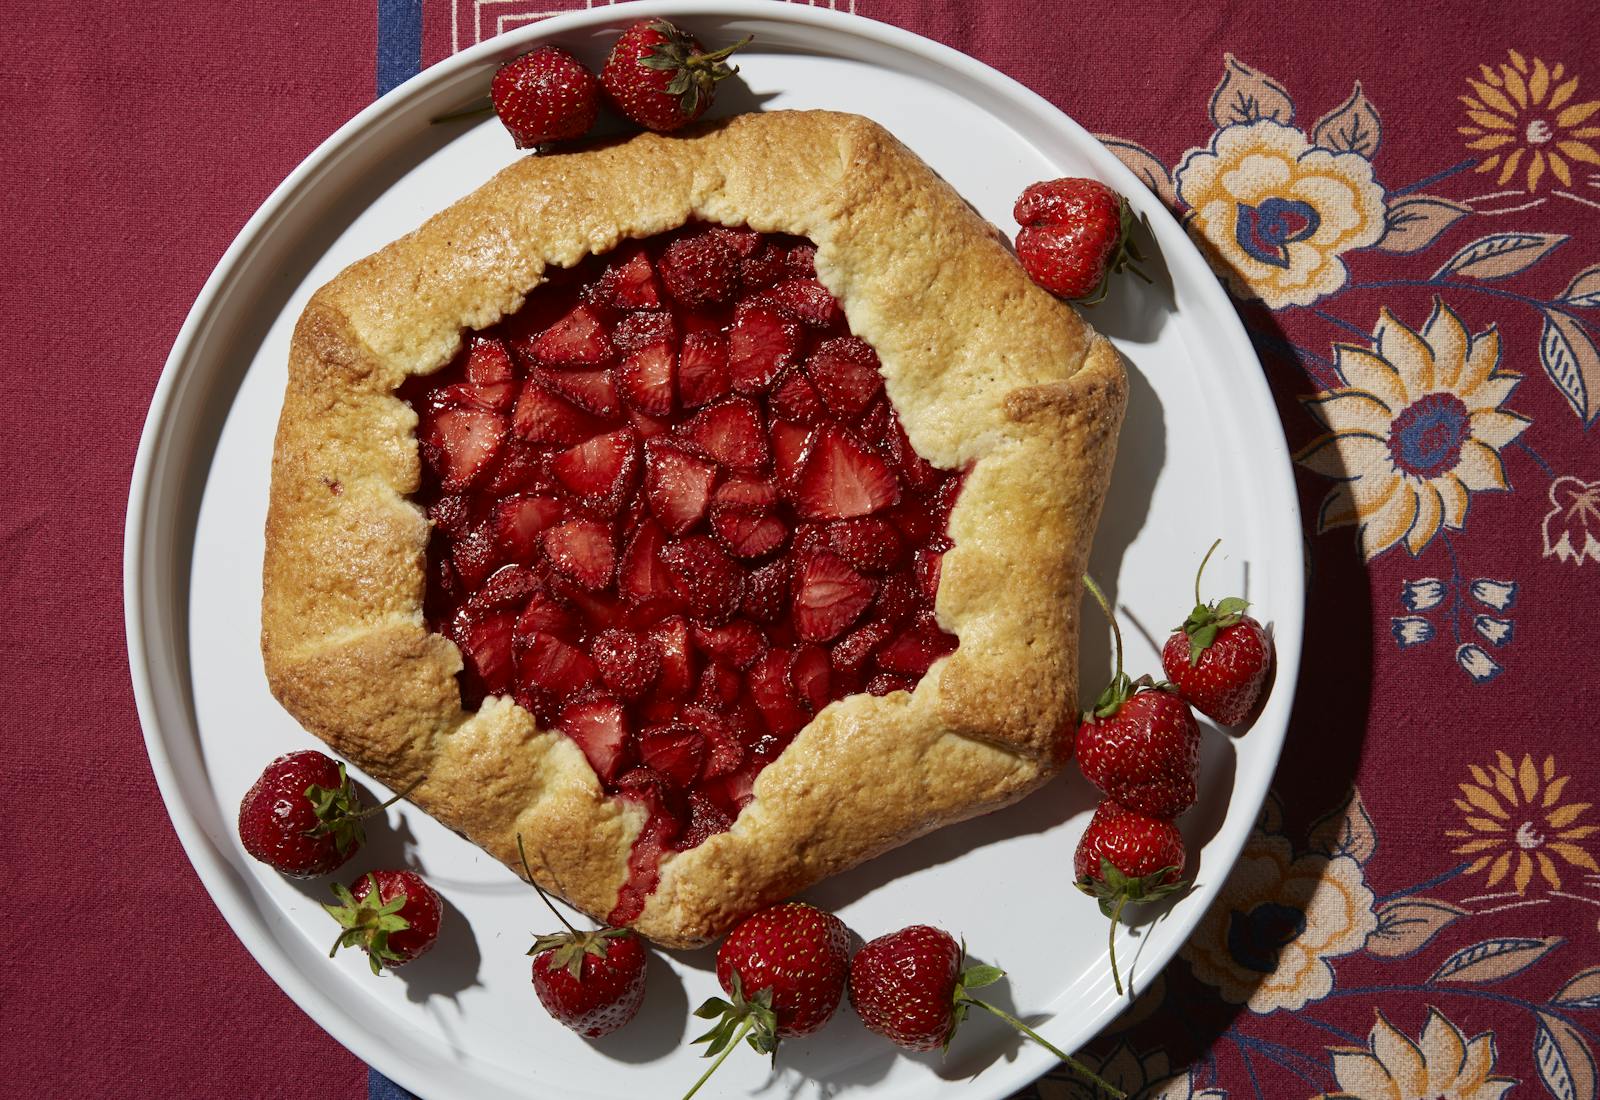 Strawberry galette on floral tablecloth.